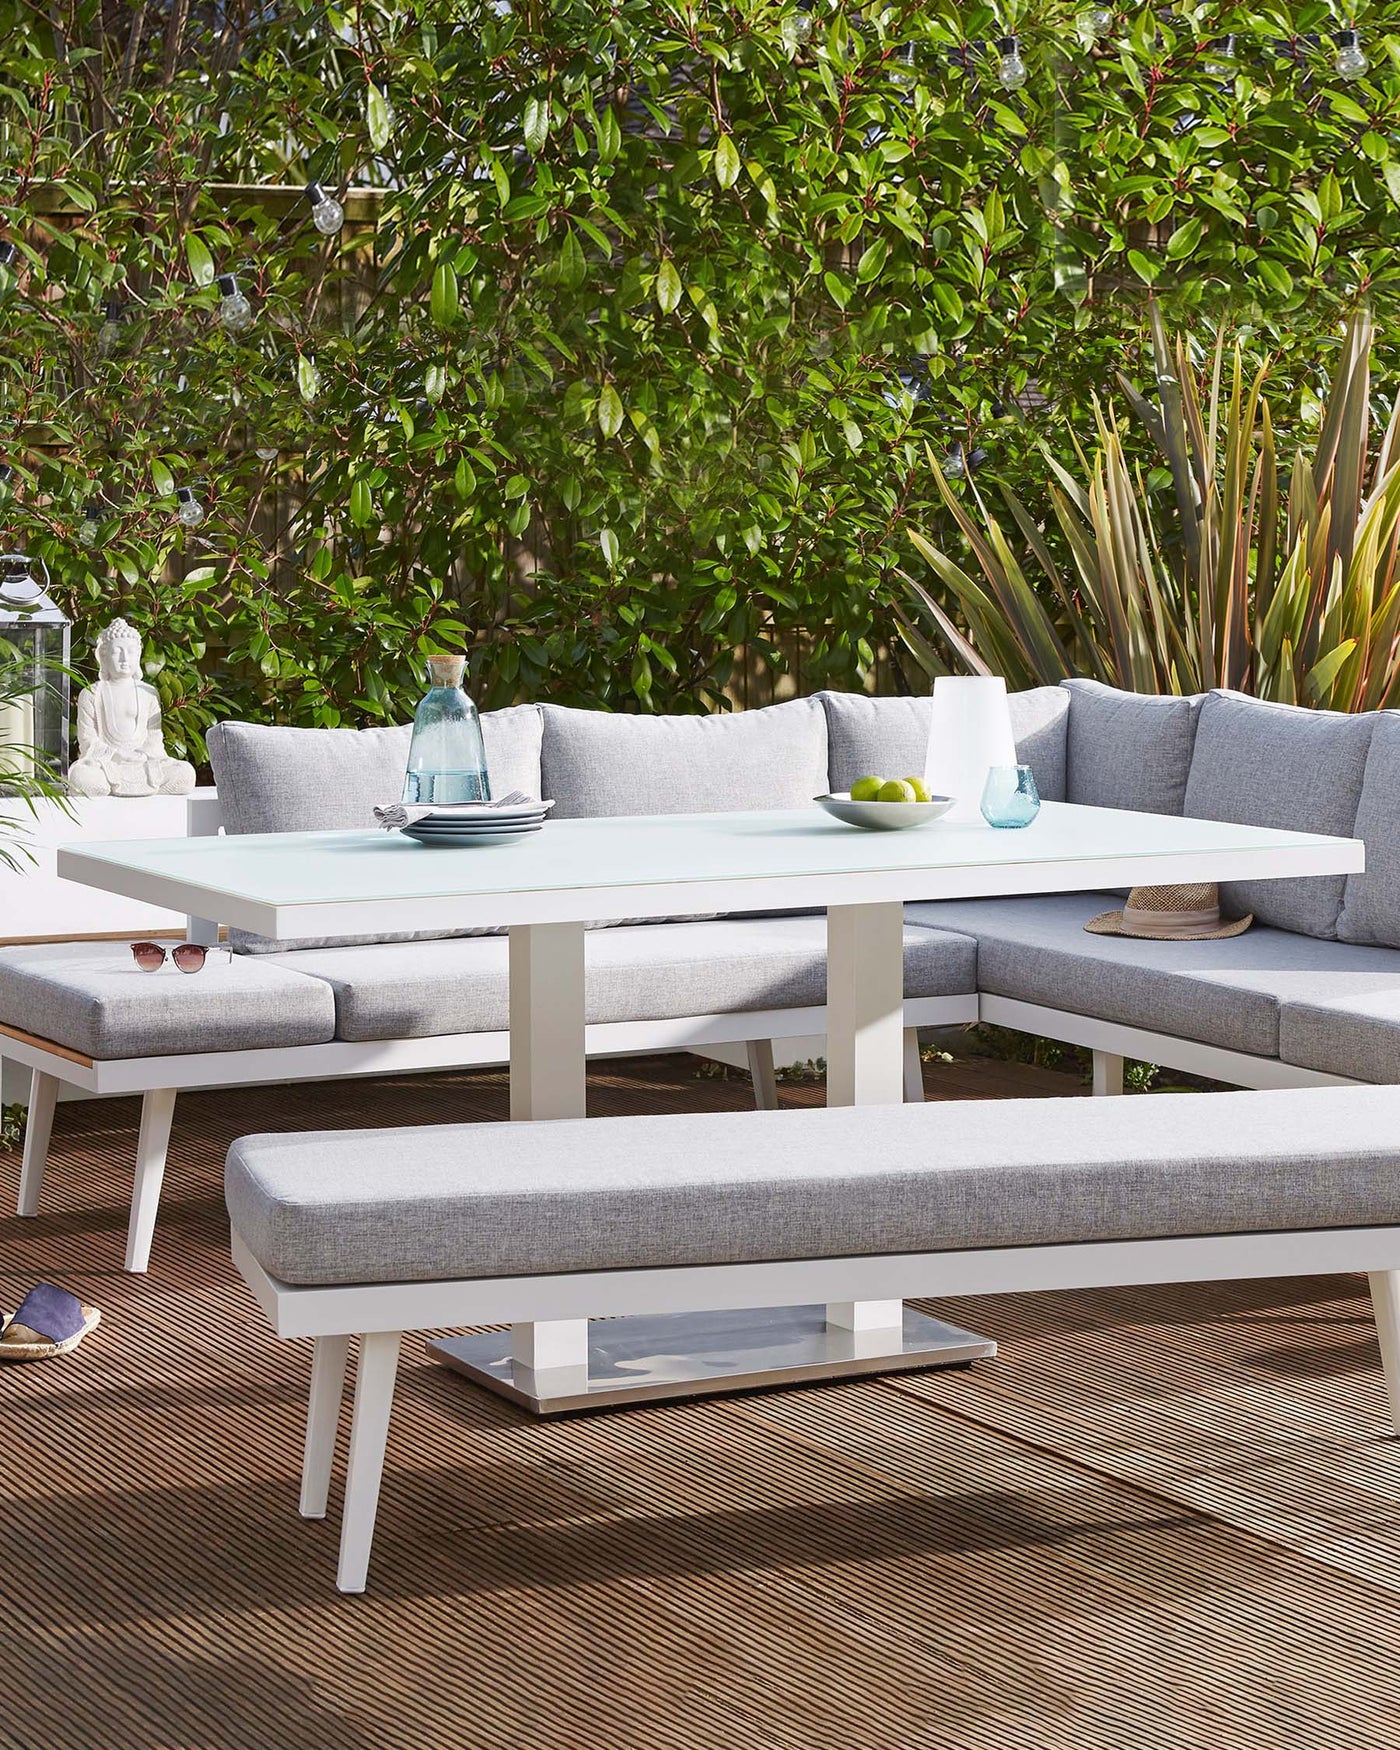 Outdoor contemporary furniture set featuring a white rectangular dining table with a sleek modern design, surrounded by a matching white corner sectional sofa and two benches, all with grey cushions. The set is arranged on a brown textured outdoor rug, complemented by decorative elements like a buddha statue, blue glassware, and a bowl of limes, creating an inviting al fresco dining space.